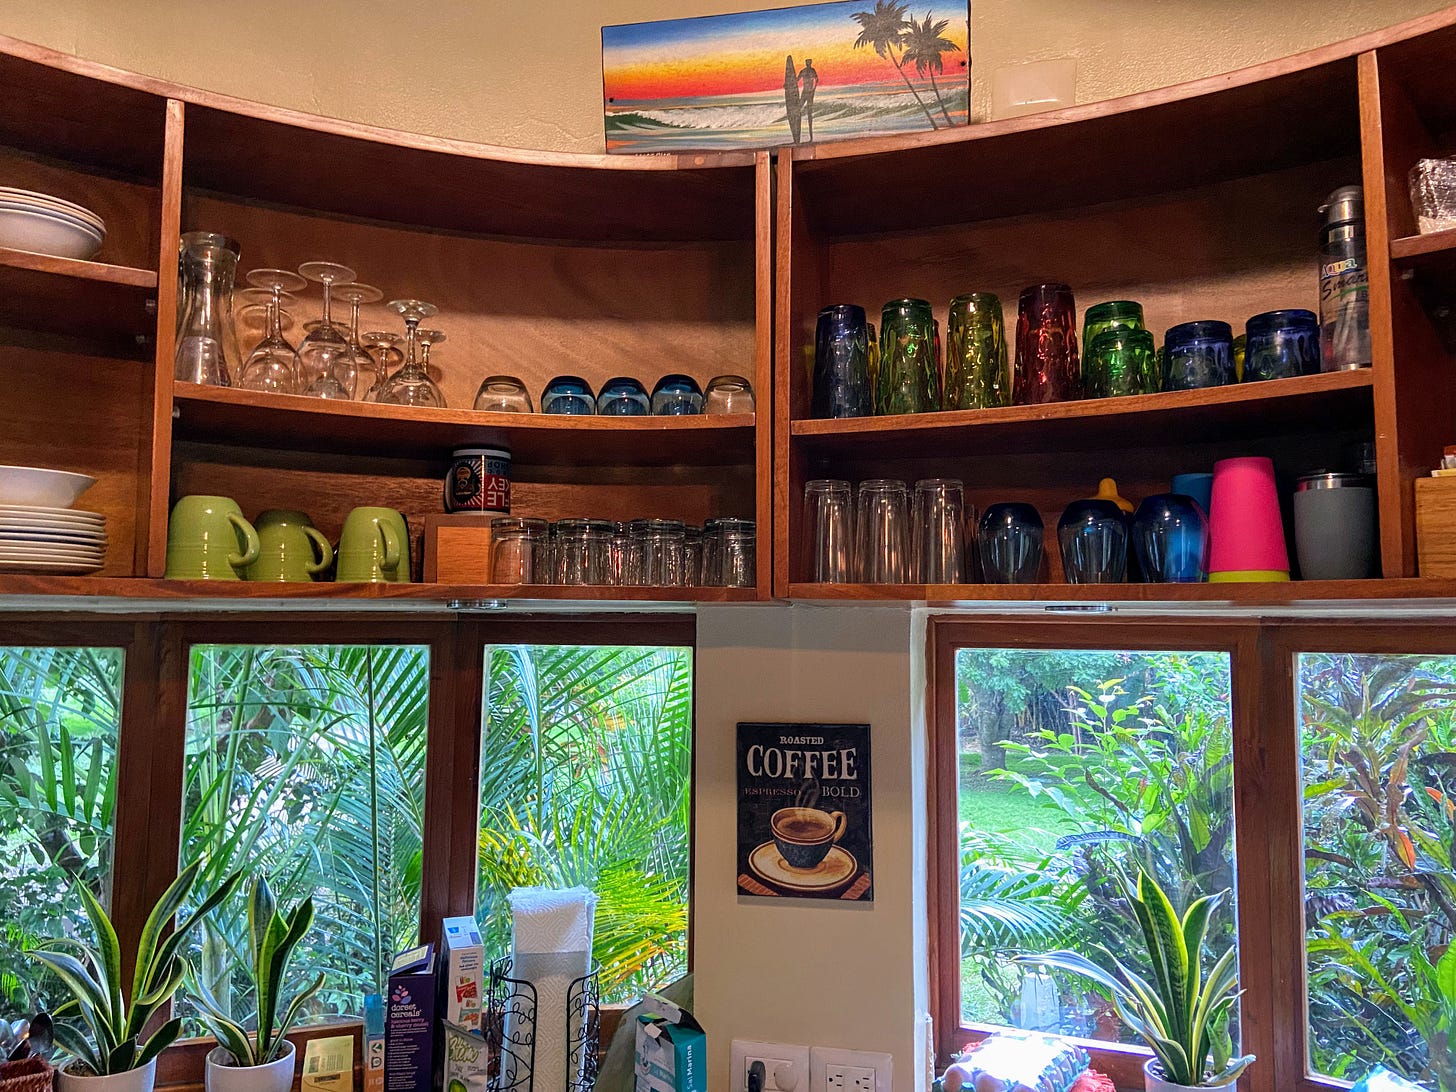 Kitchen shelves with glasses and cups, over windows with plants outside.